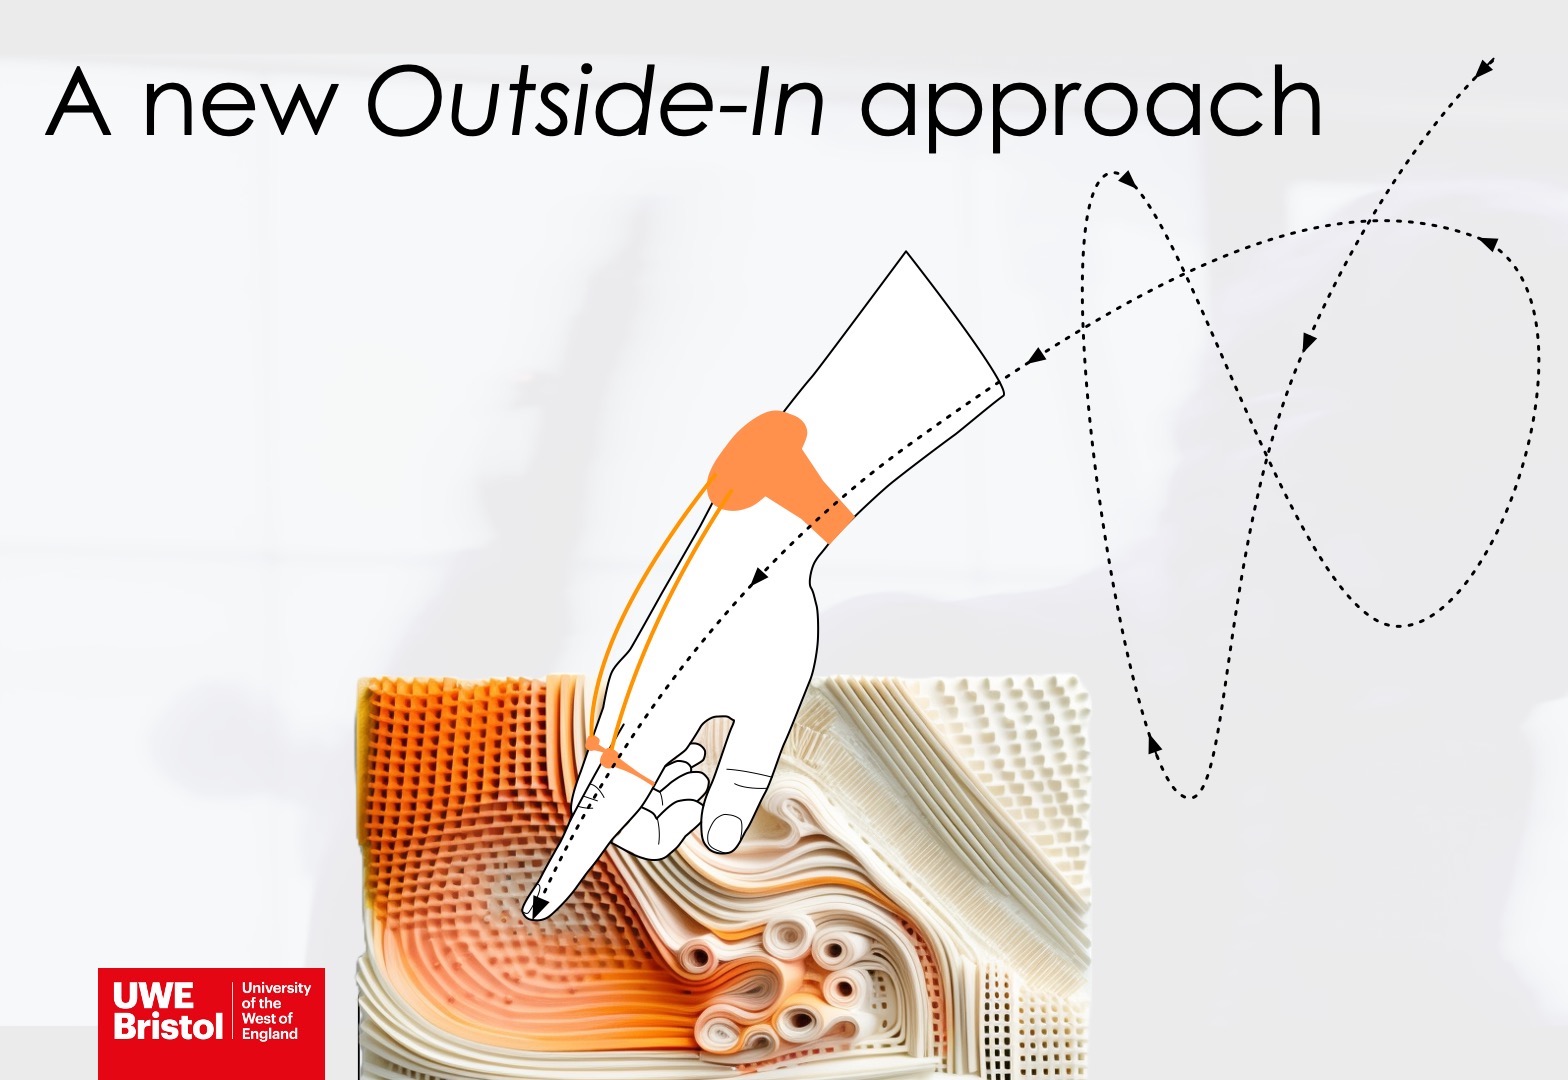 An image with the text a 'new outside in approach' and an illustration a hand interacting what an unusual looking interface with a wearable sensor with arrows indicating motion